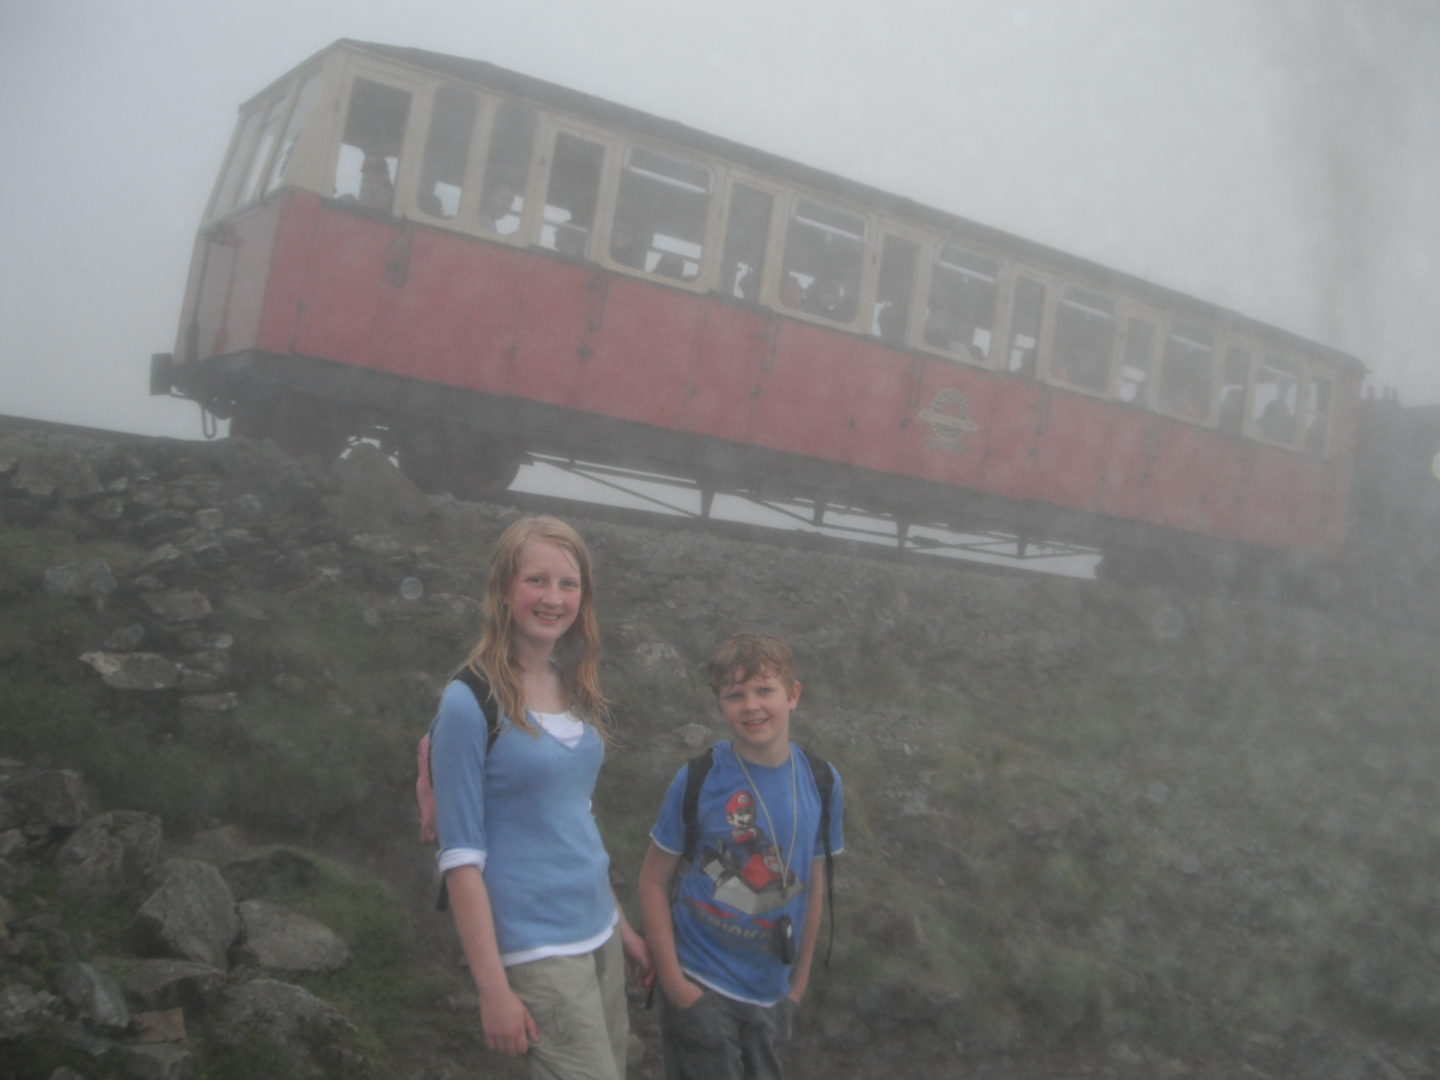 Xene and Lochlan with tyhe Mount Snowdon train in the background